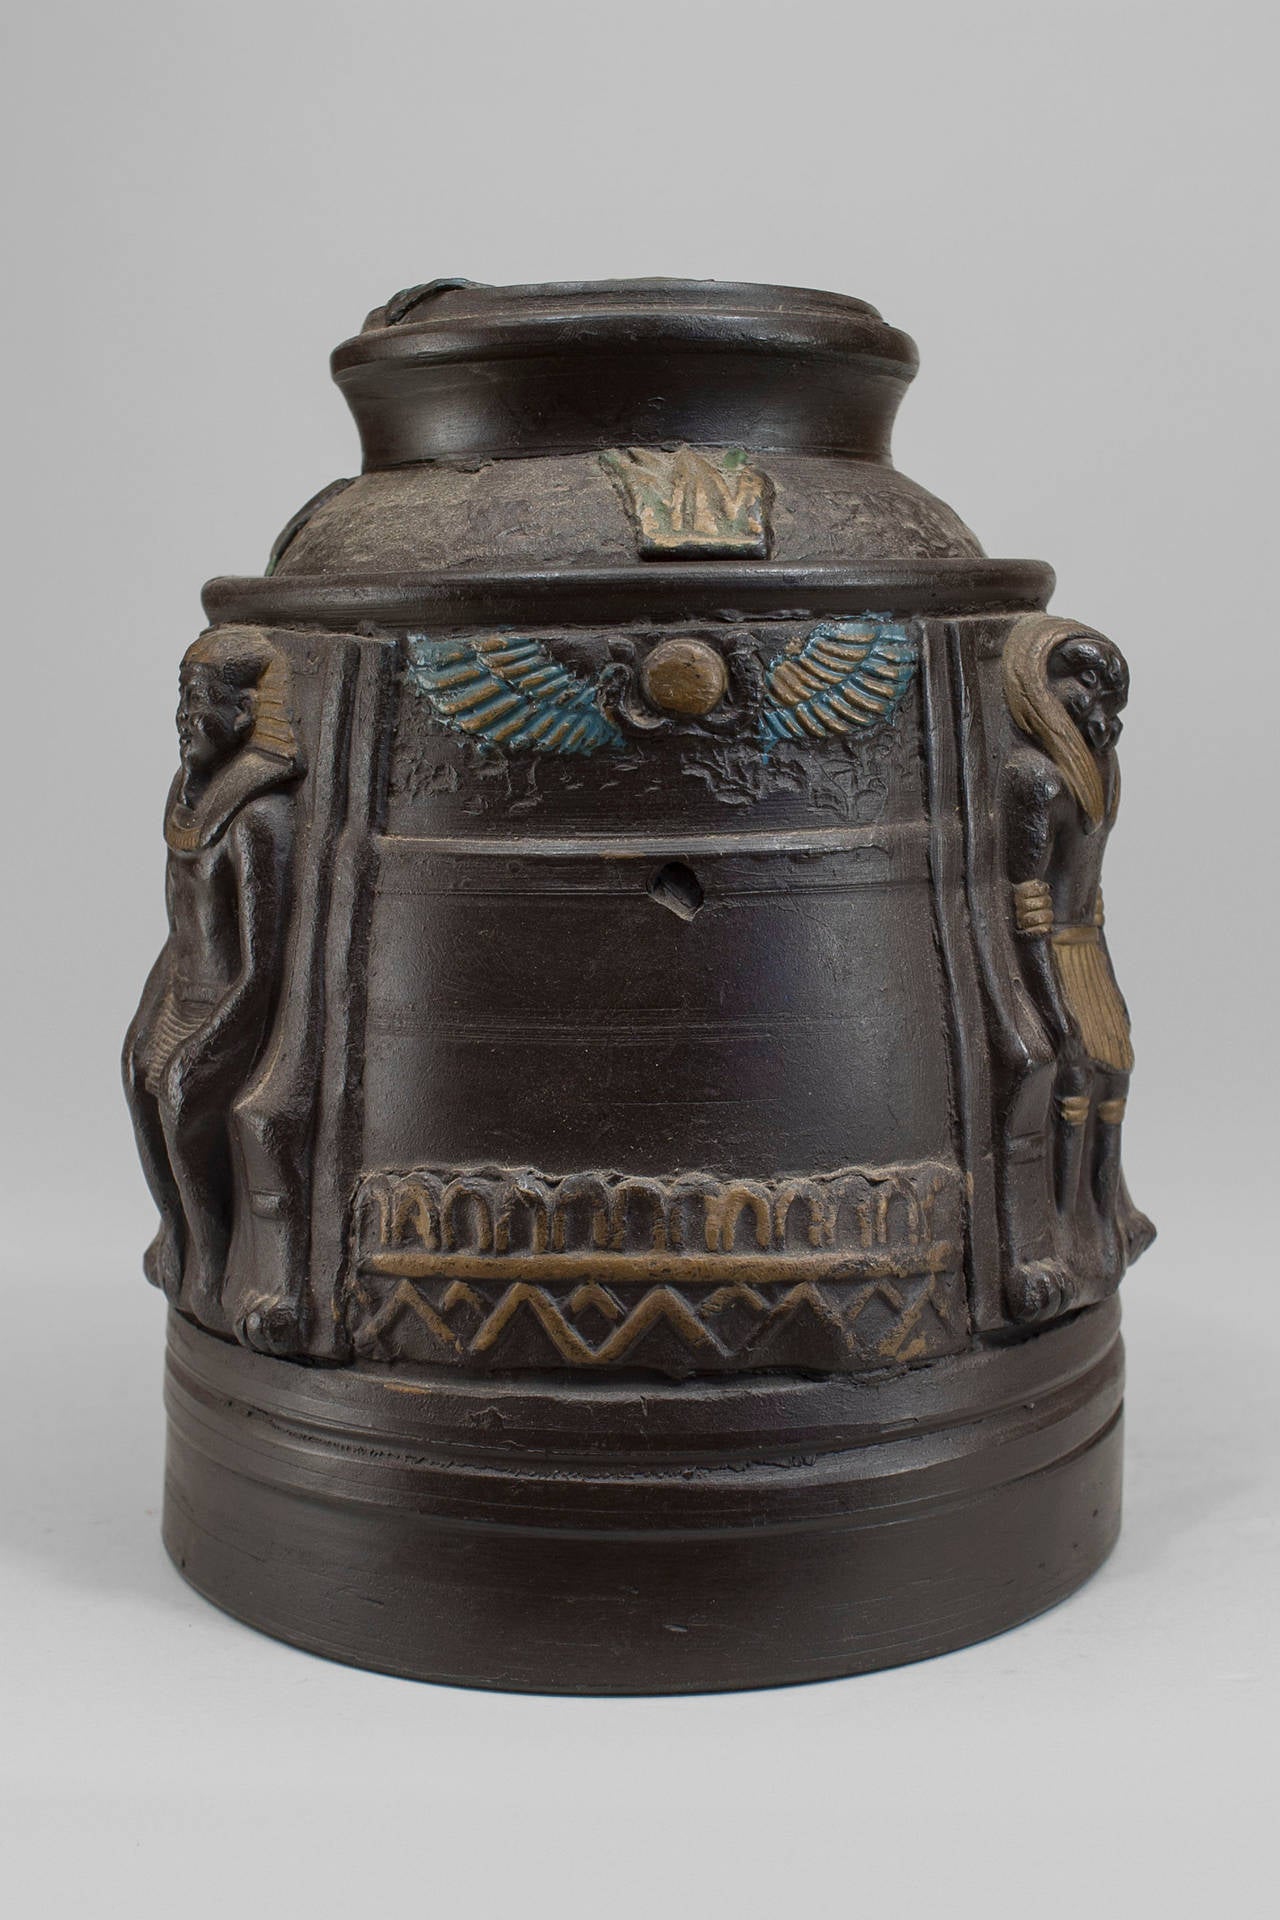 Middle Eastern Egyptian-style (1920's) tobacco jar with lid and classical figures in relief with blue and gold painted trim (made in Japan)
